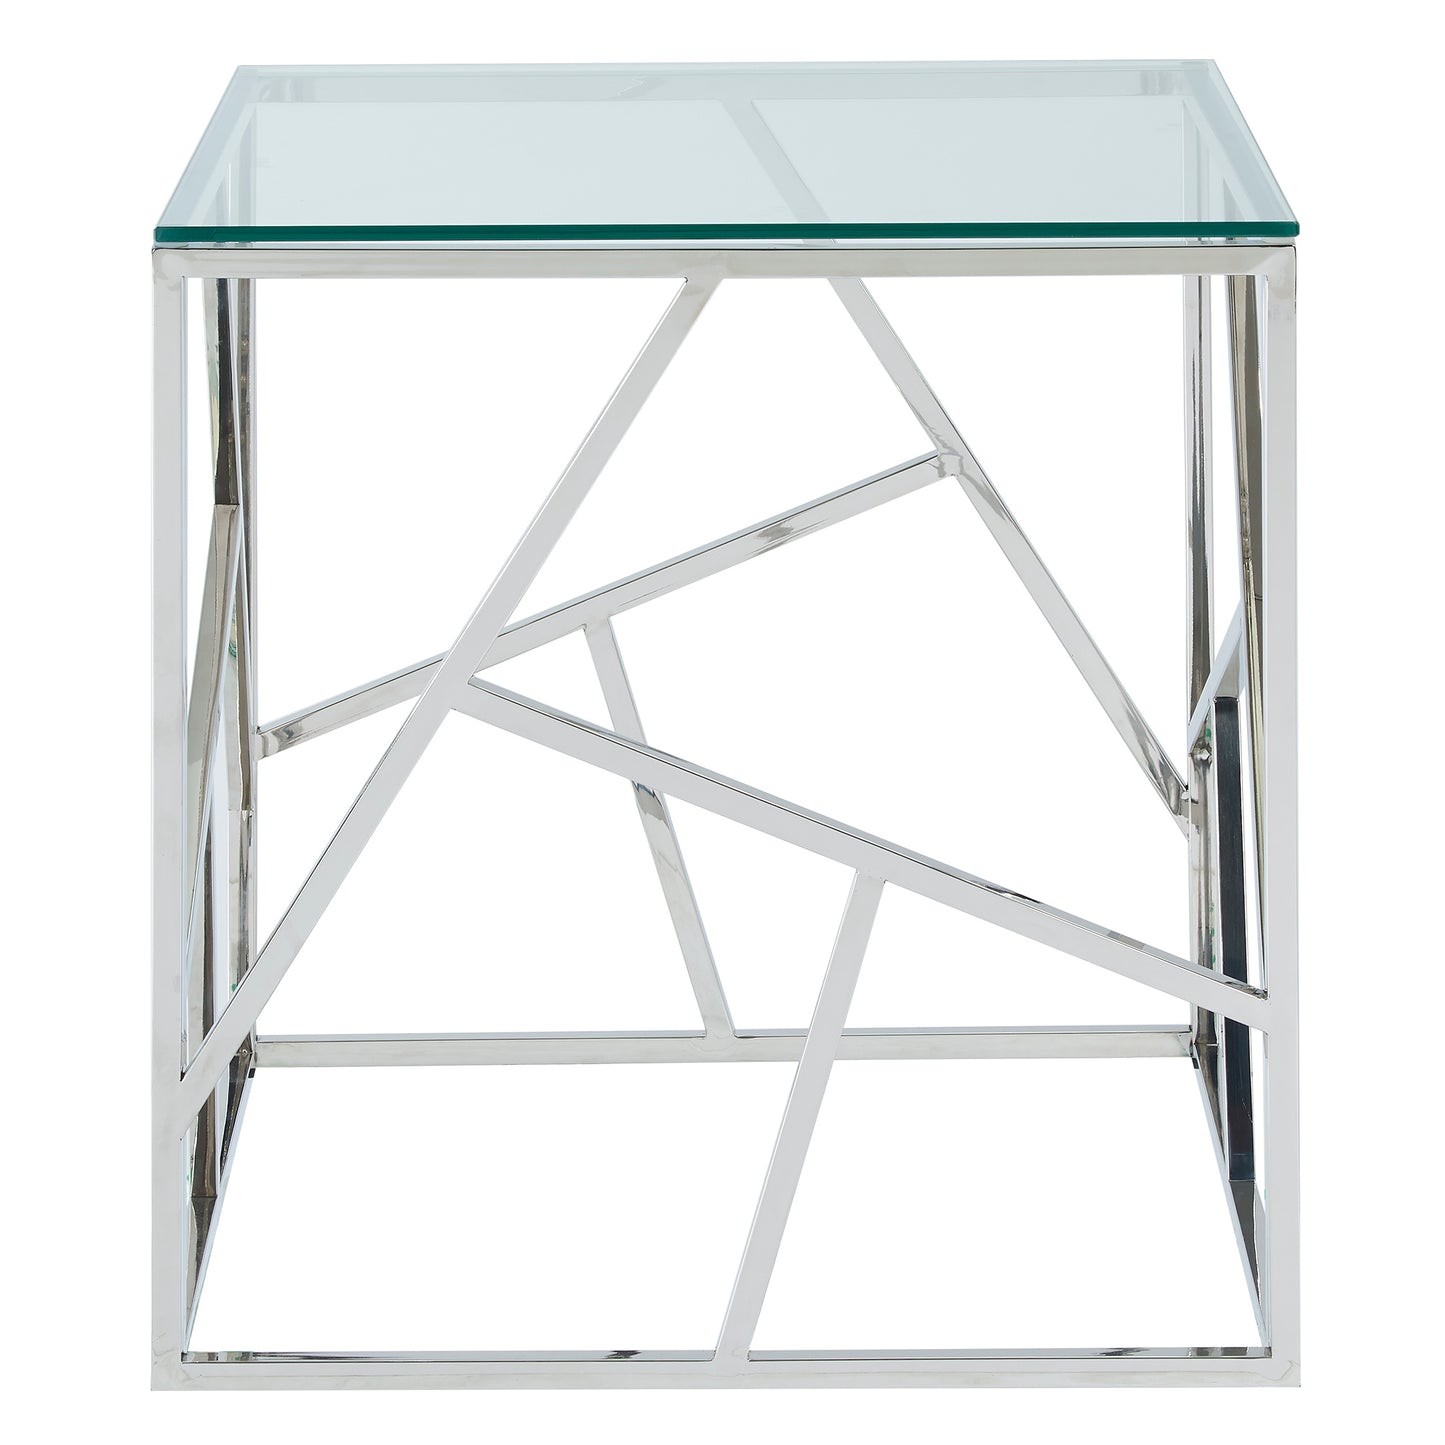 (JUNIPER CHROME)- GLASS ACCENT TABLE- INVENTORY CLEARANCE